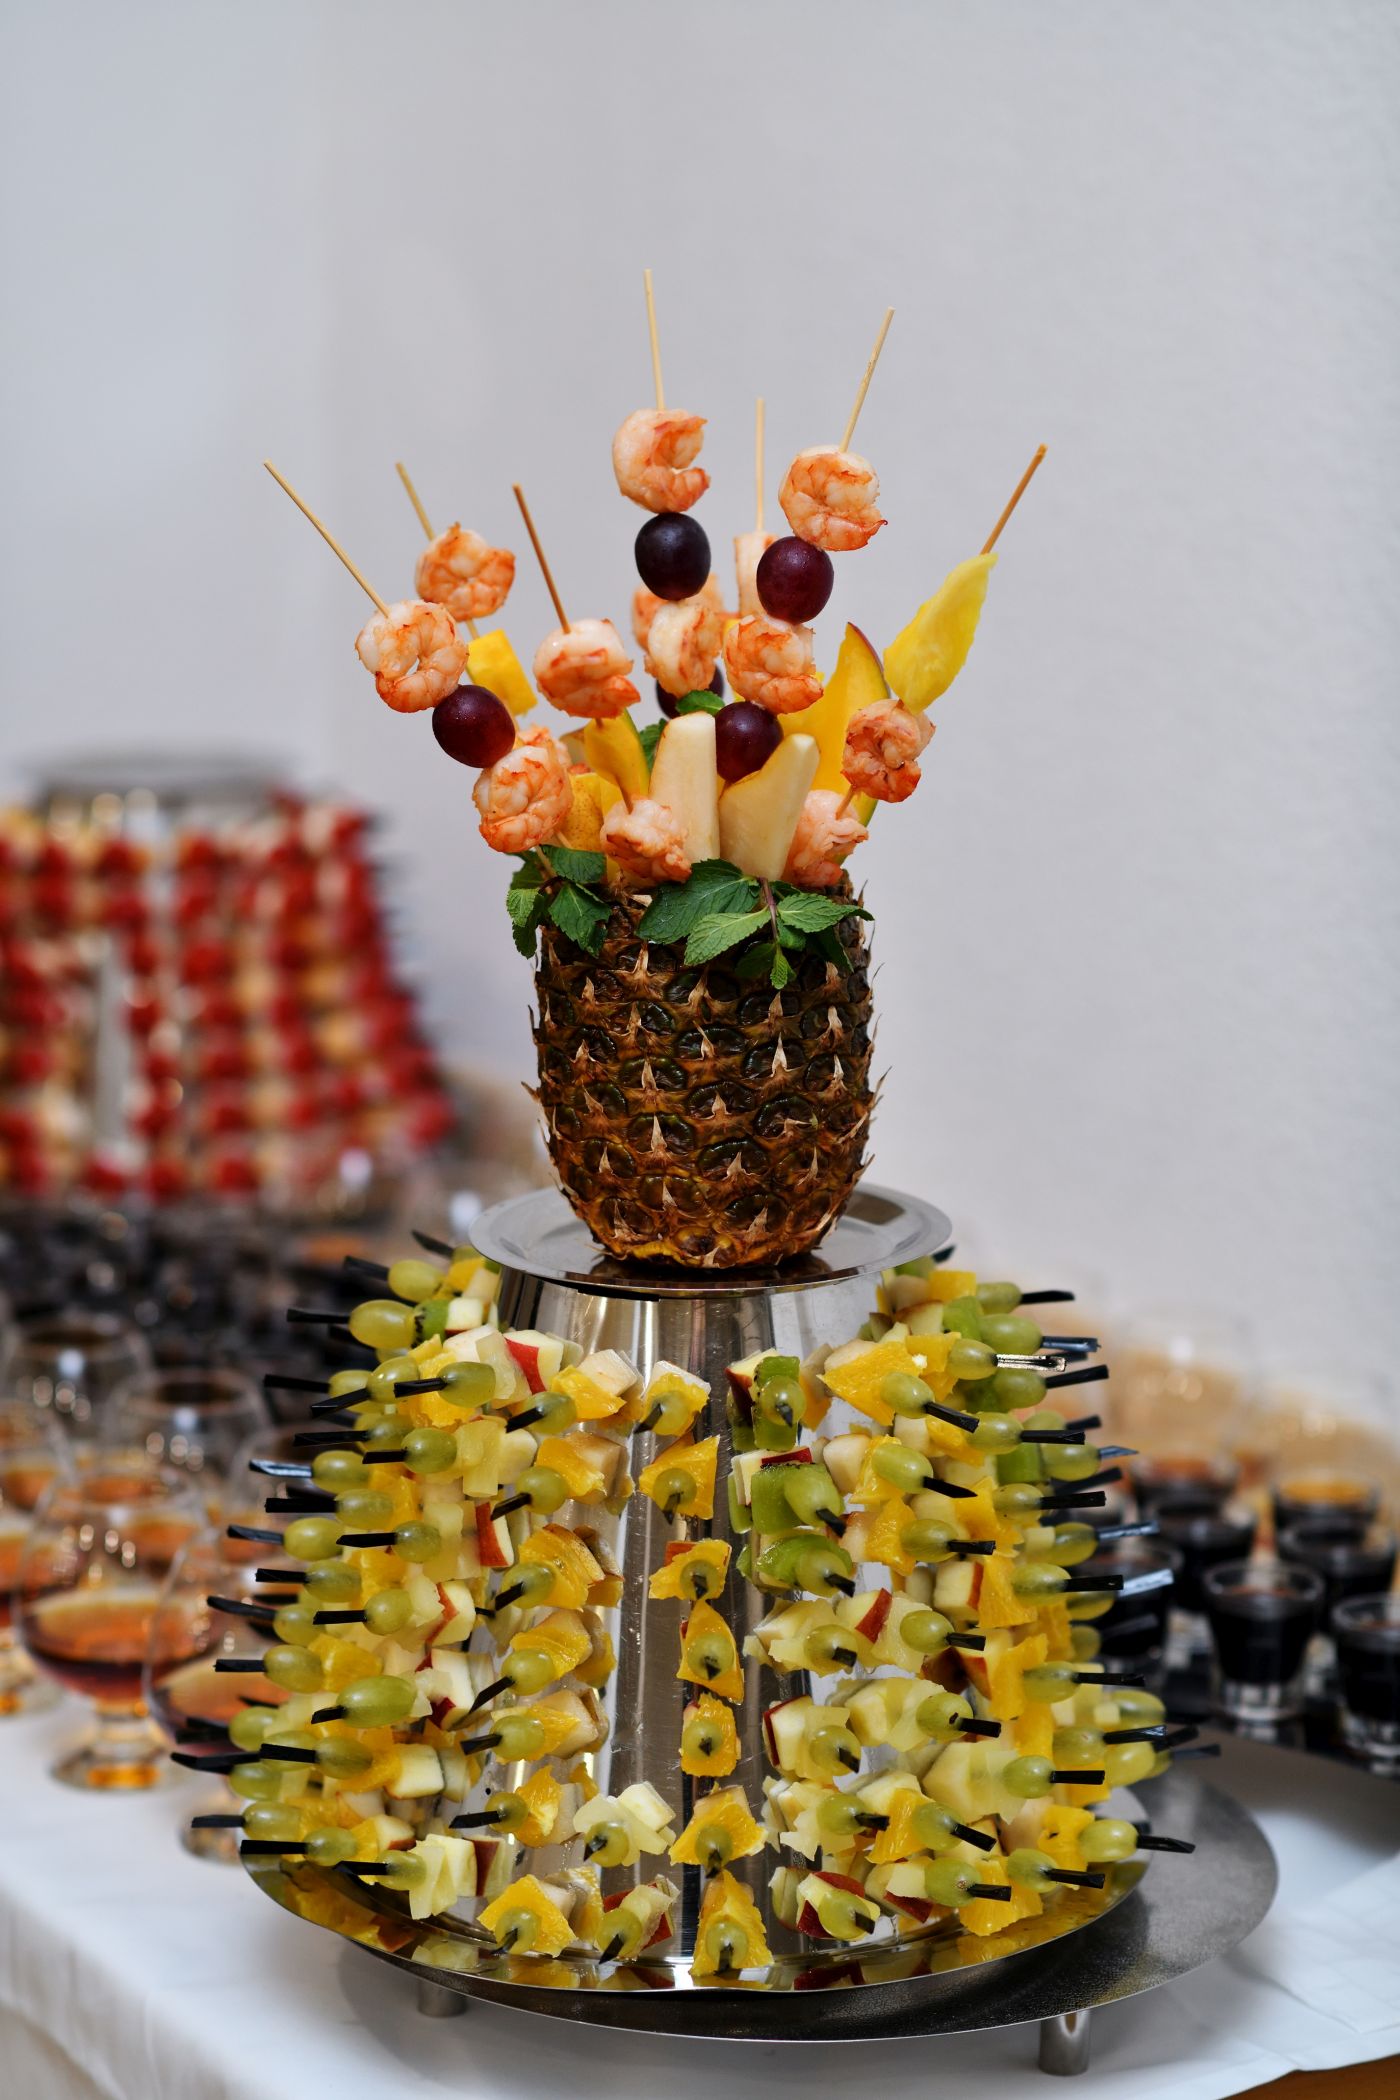 Canapes & Pineapple